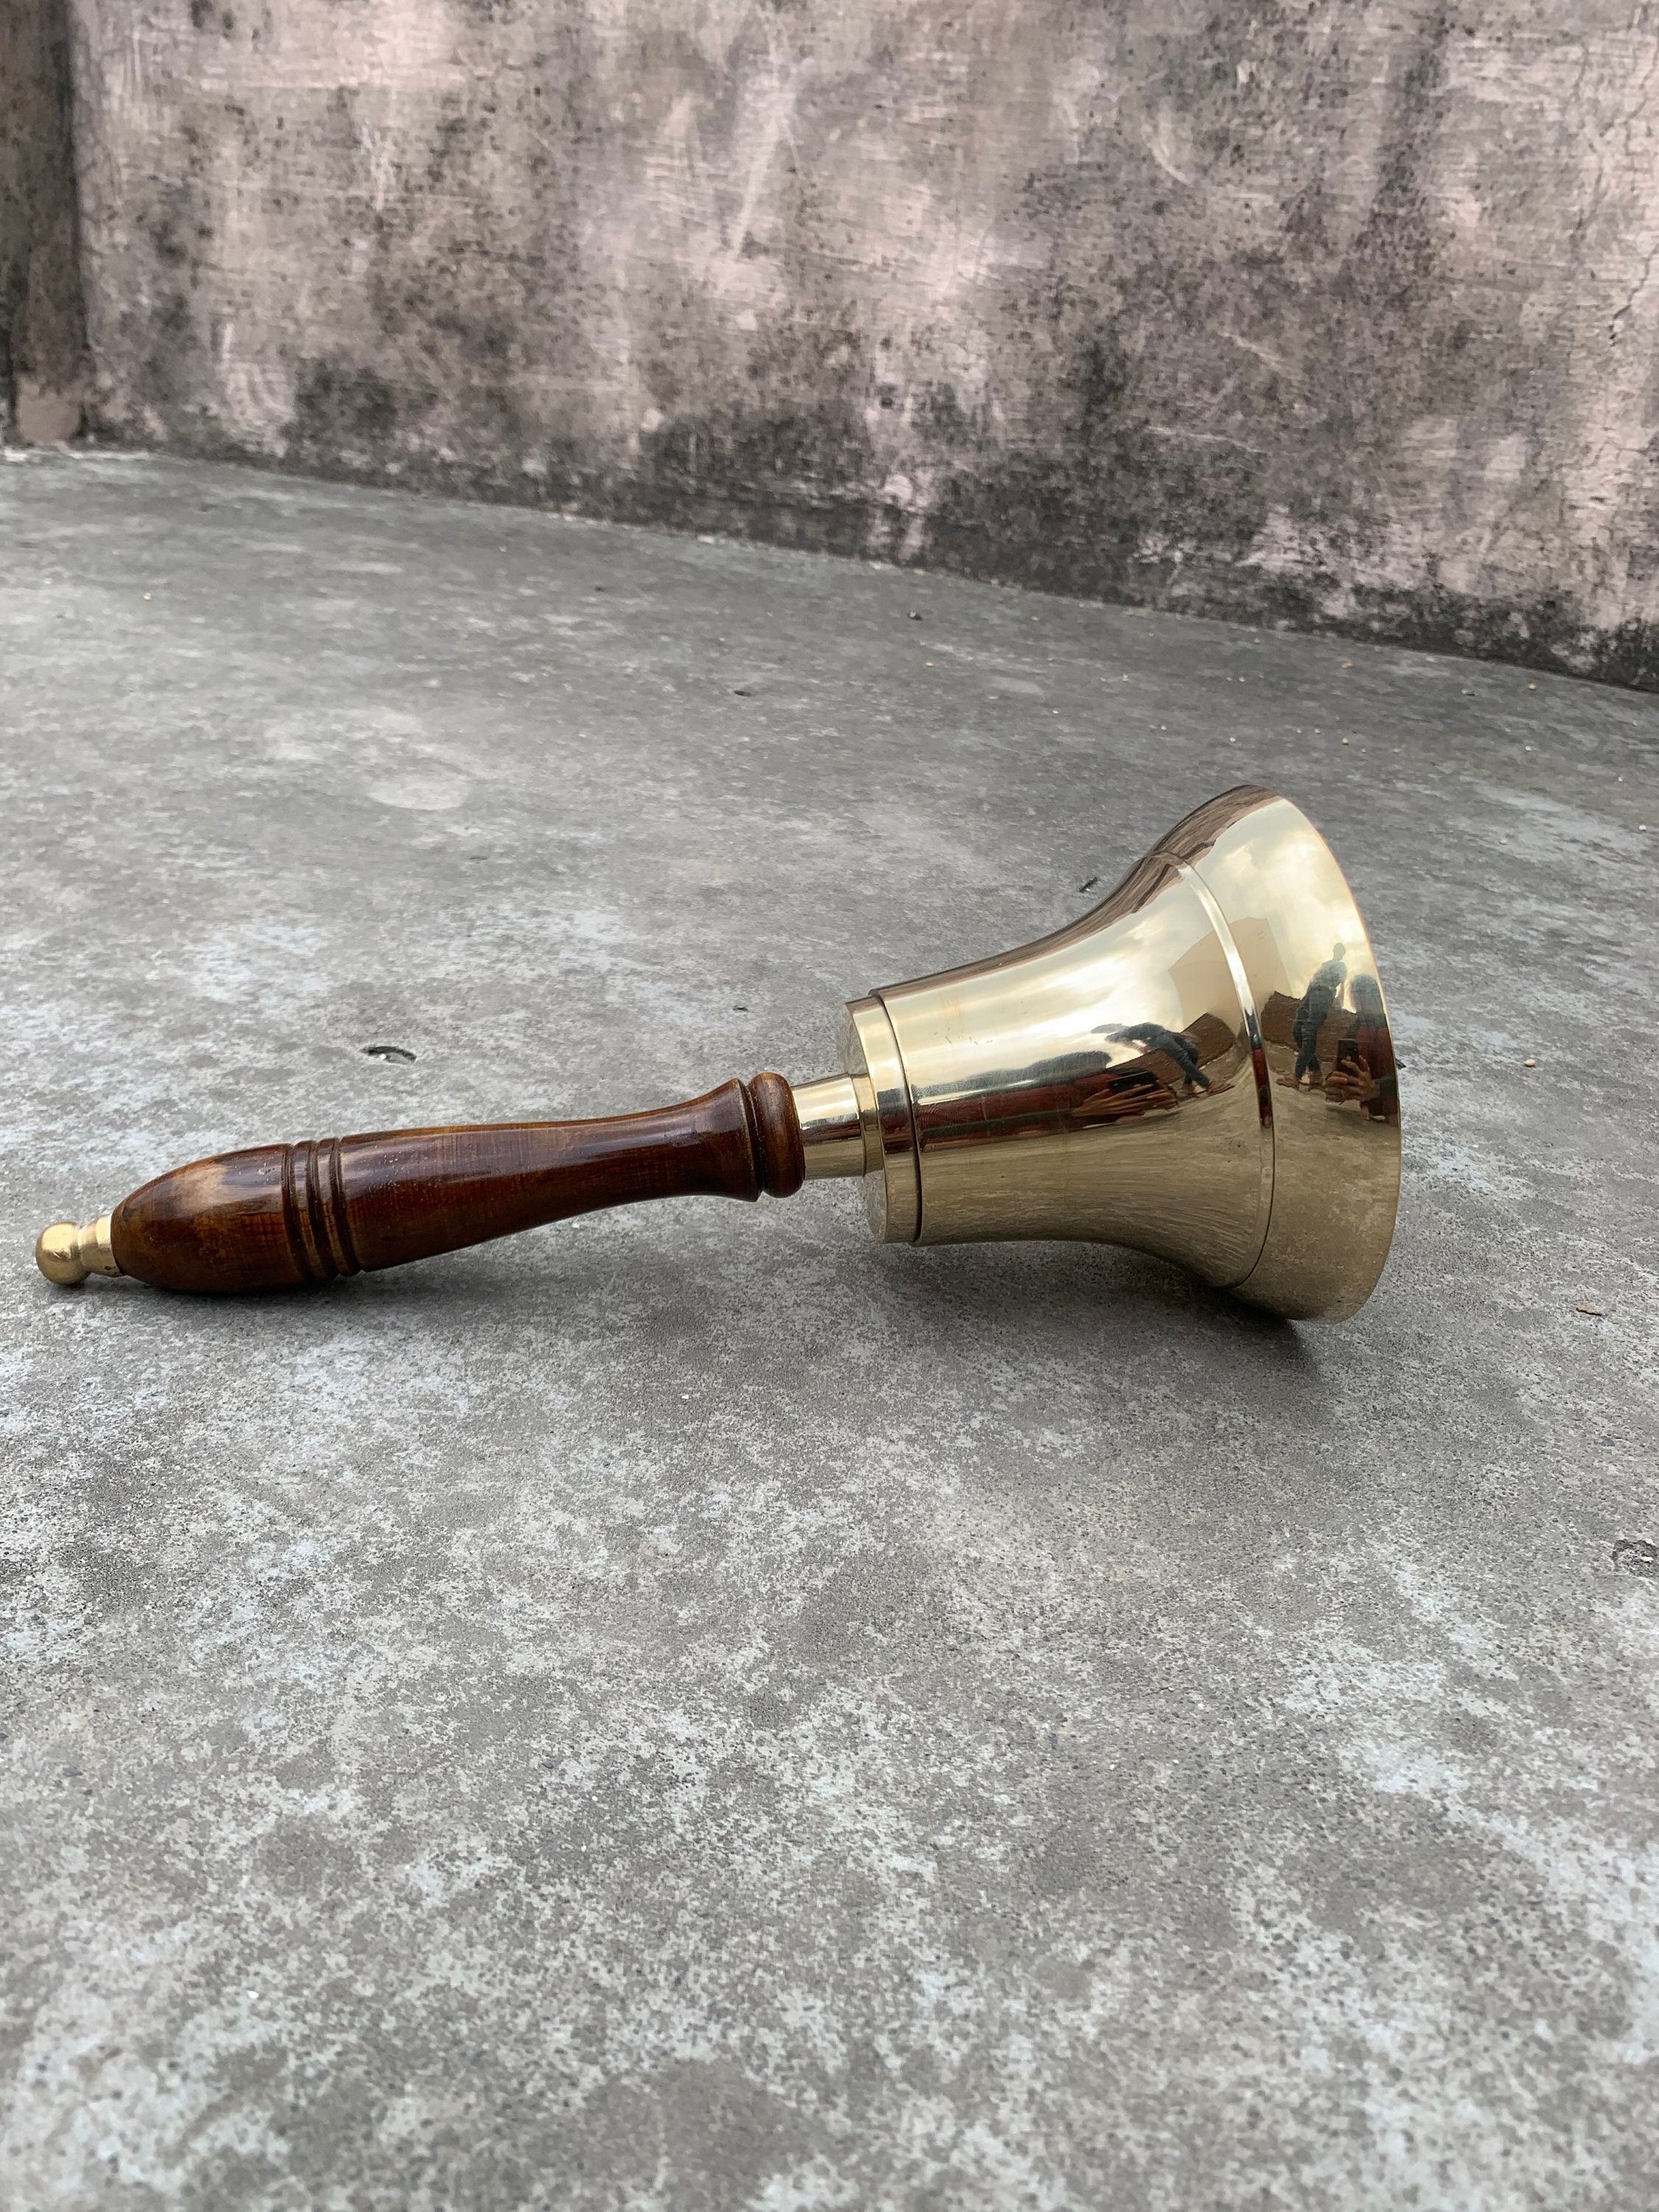 Large & Heavy Solid Brass Hand Bell School Bell Call Service Bell with Wood Handle 11 inch(H) 5 inch(d)